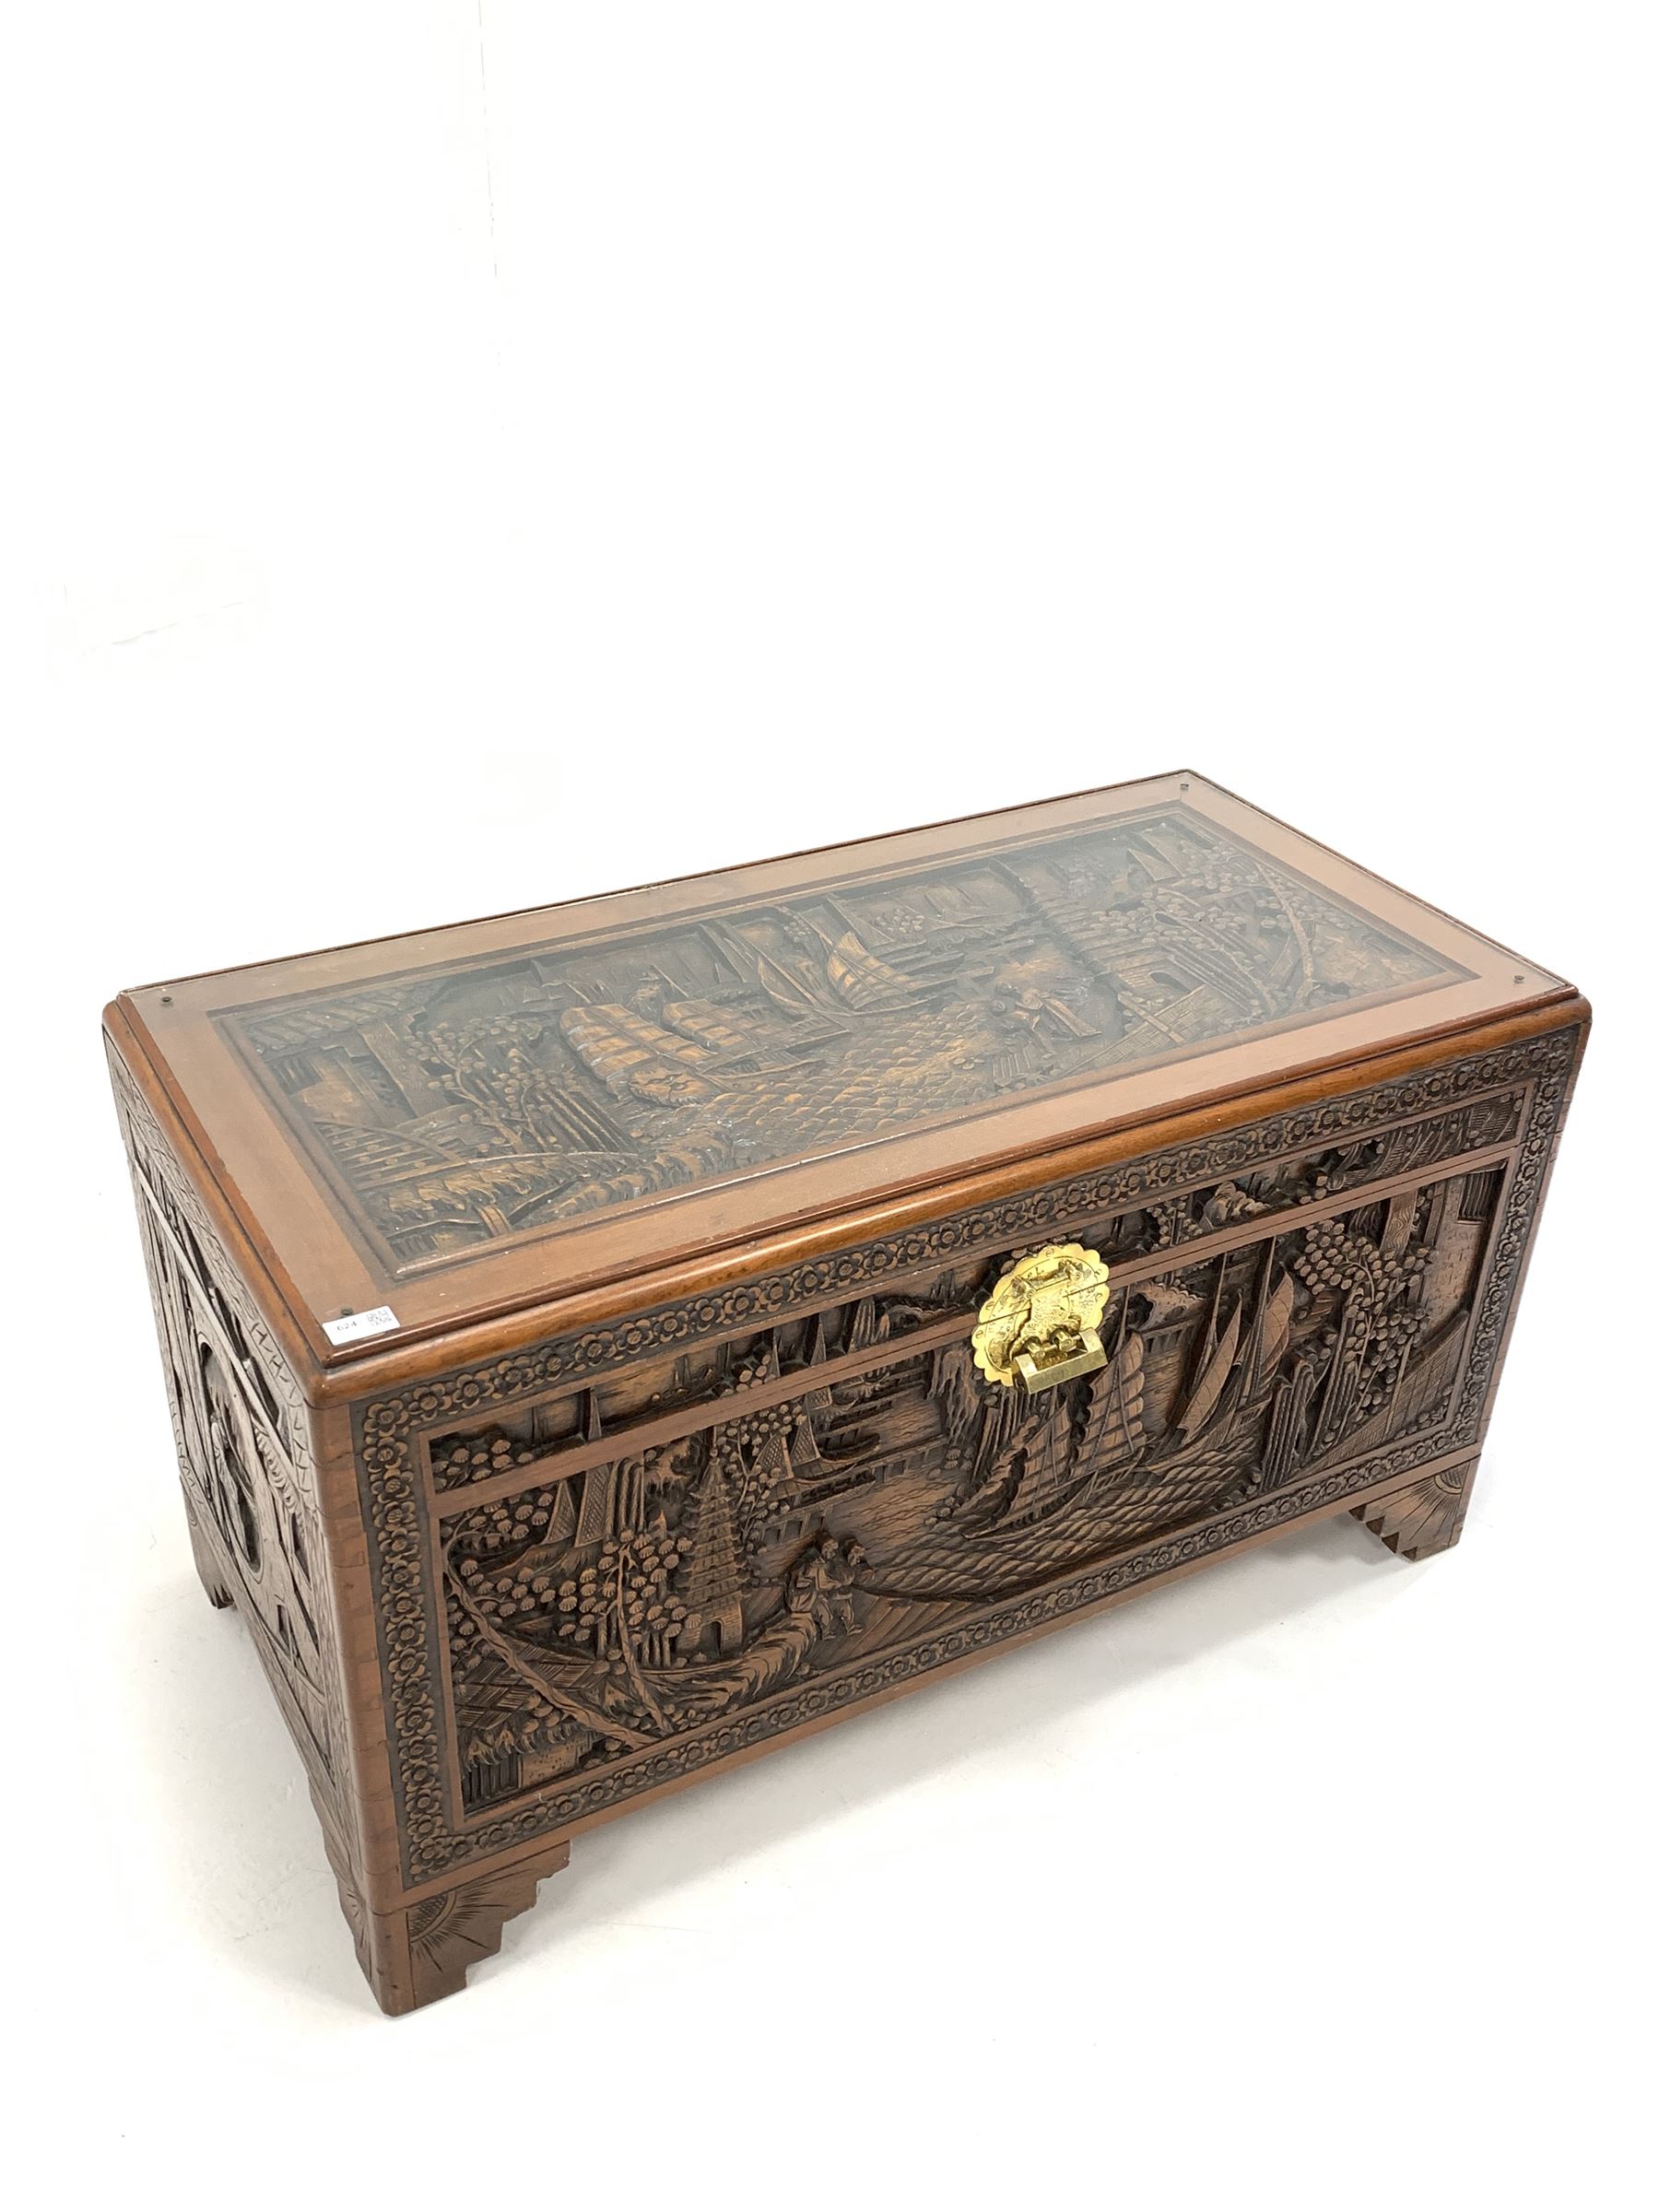 Chinese camphor wood chest - Image 2 of 4